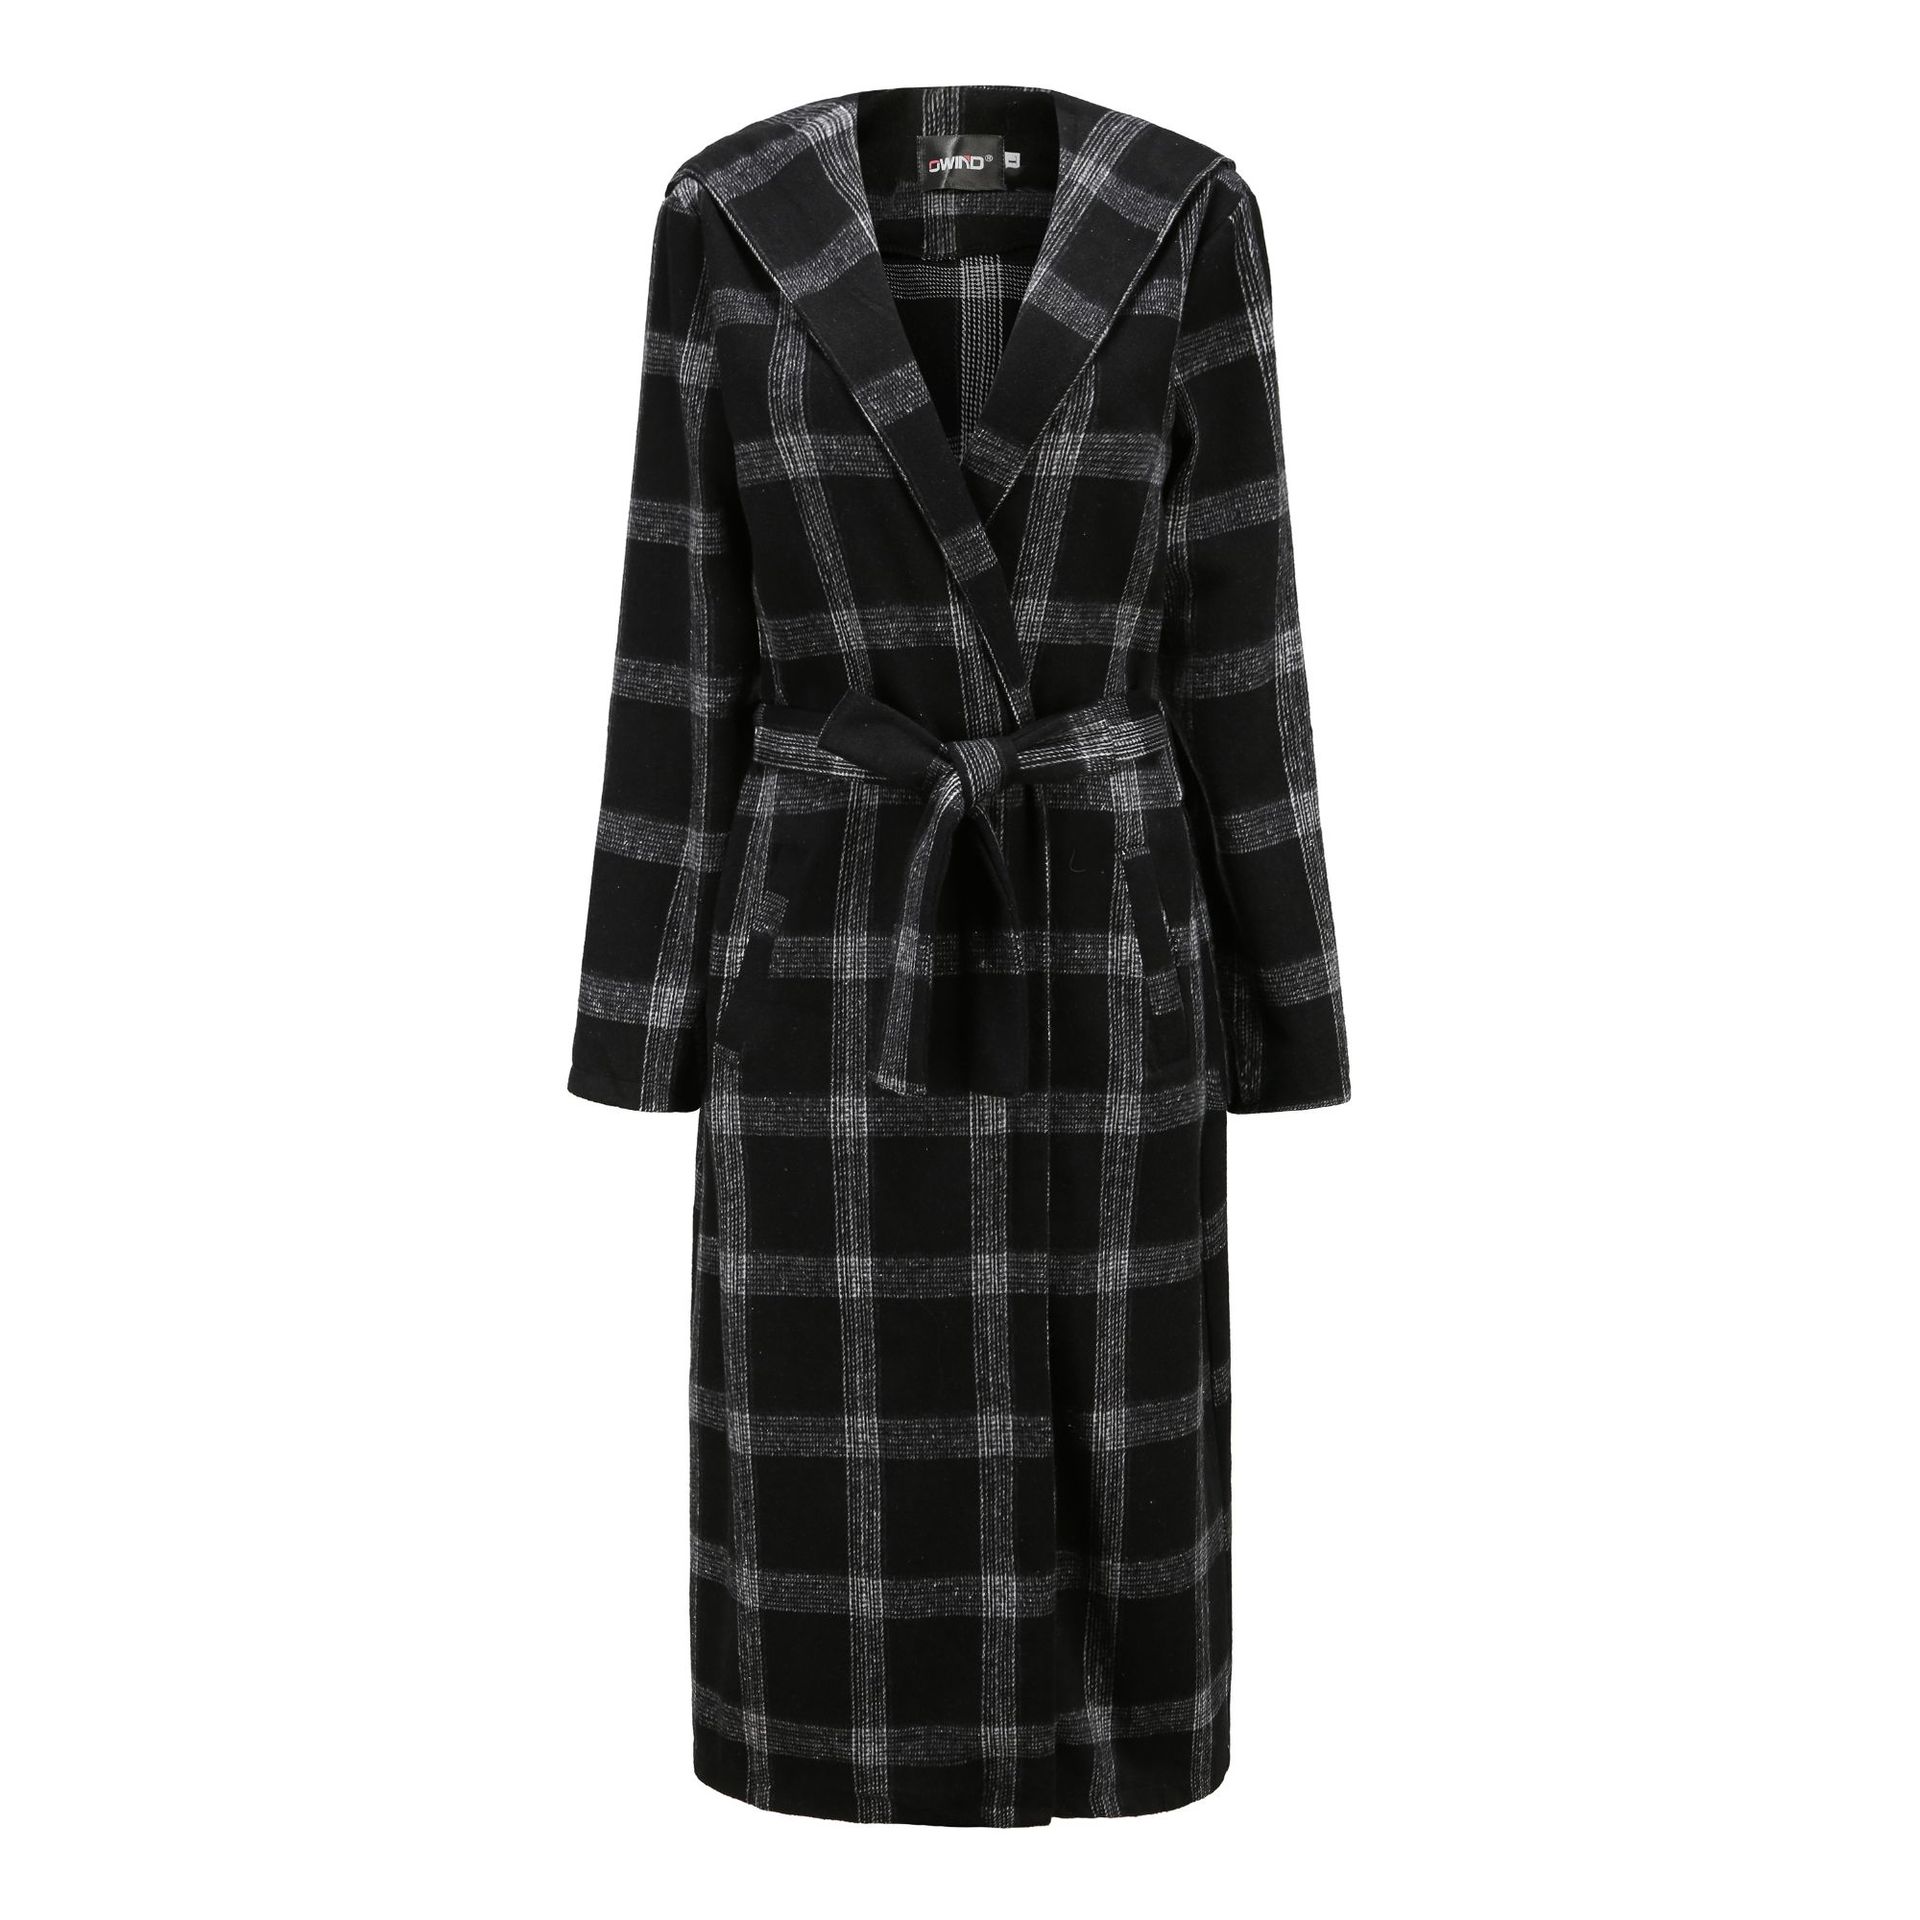 Women's Autumn Winter Lengthened Coat Black Wool Fashion Plaid Slim Jacket Blends Cashmere Overcoat Hooded Tweed Trench